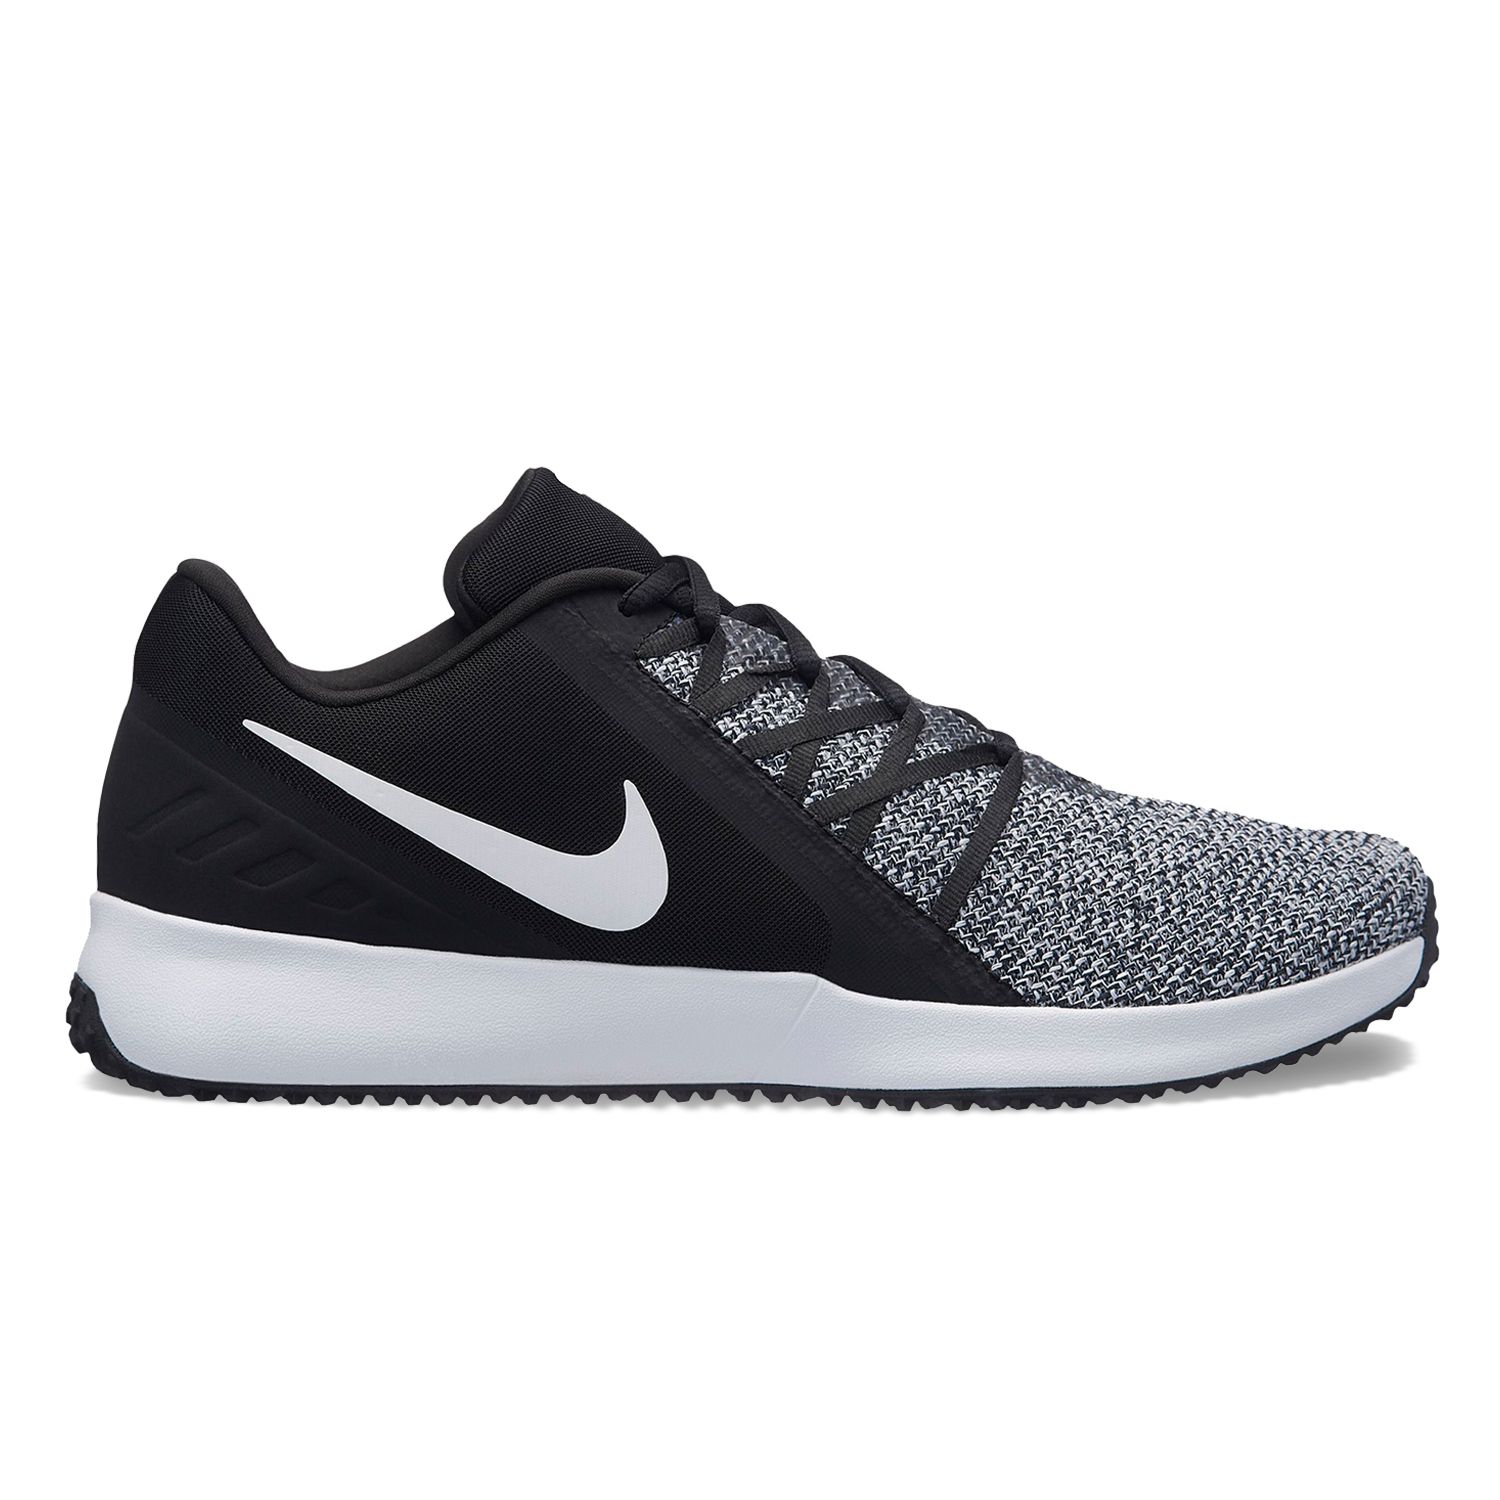 nike men's varsity compete trainer training shoes